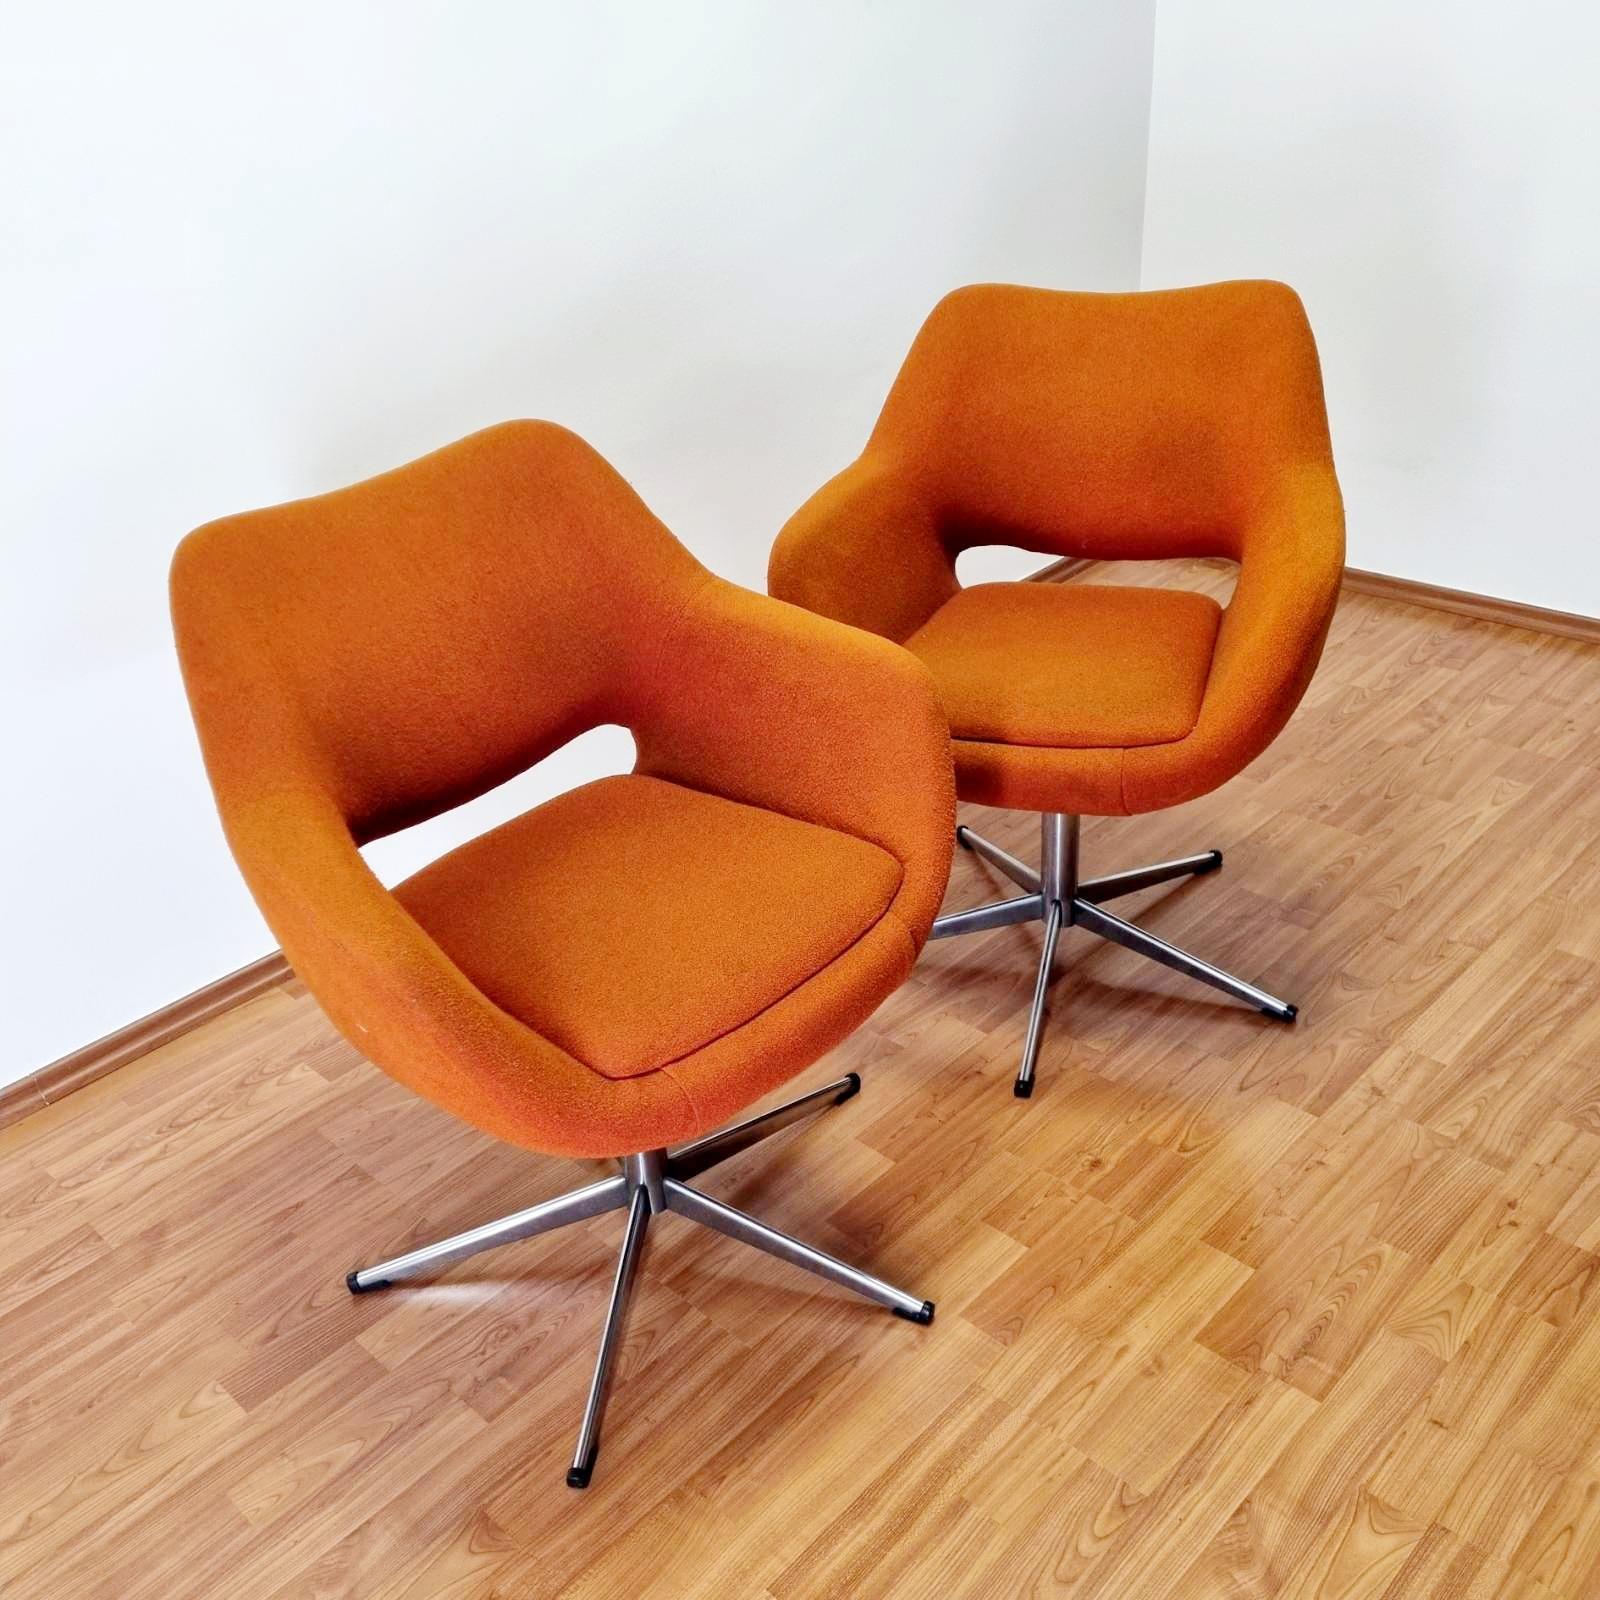 Mid century swivel egg chairs from the 70s era. Made in Yugoslavia by Stol Kamnik.
Original fabric from the 70s.